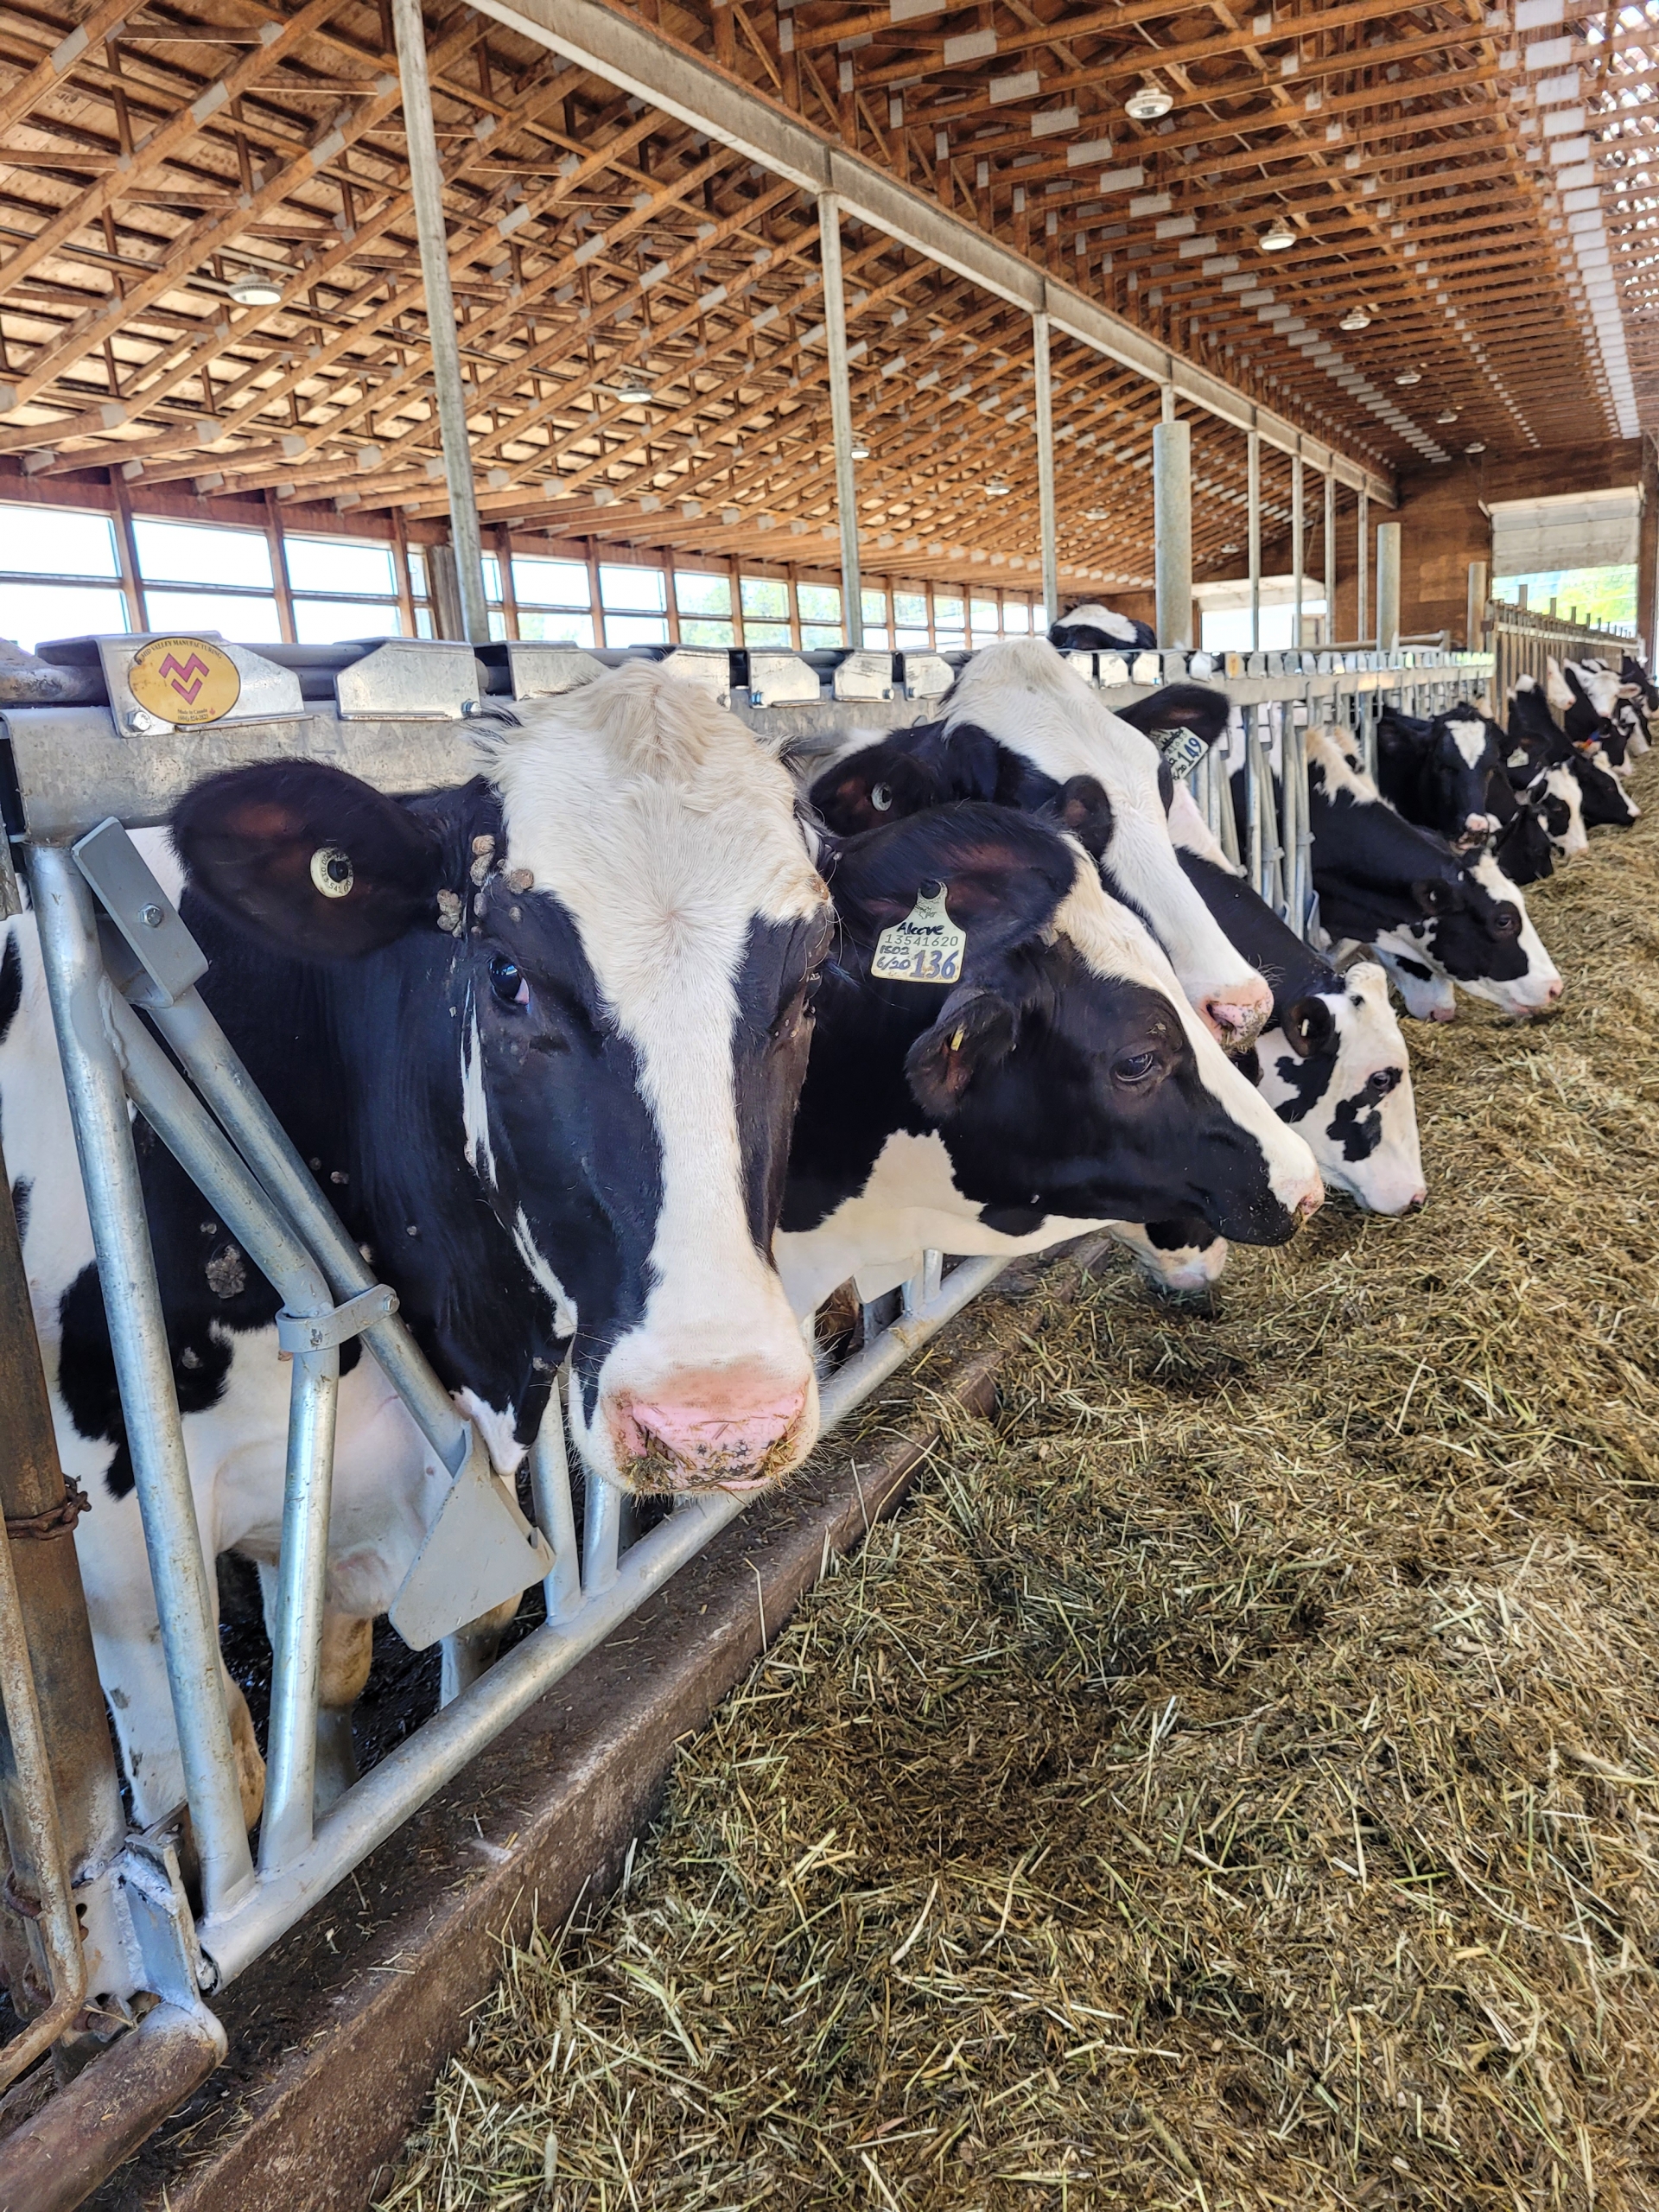 Cow stanchions with dairy cows feeding